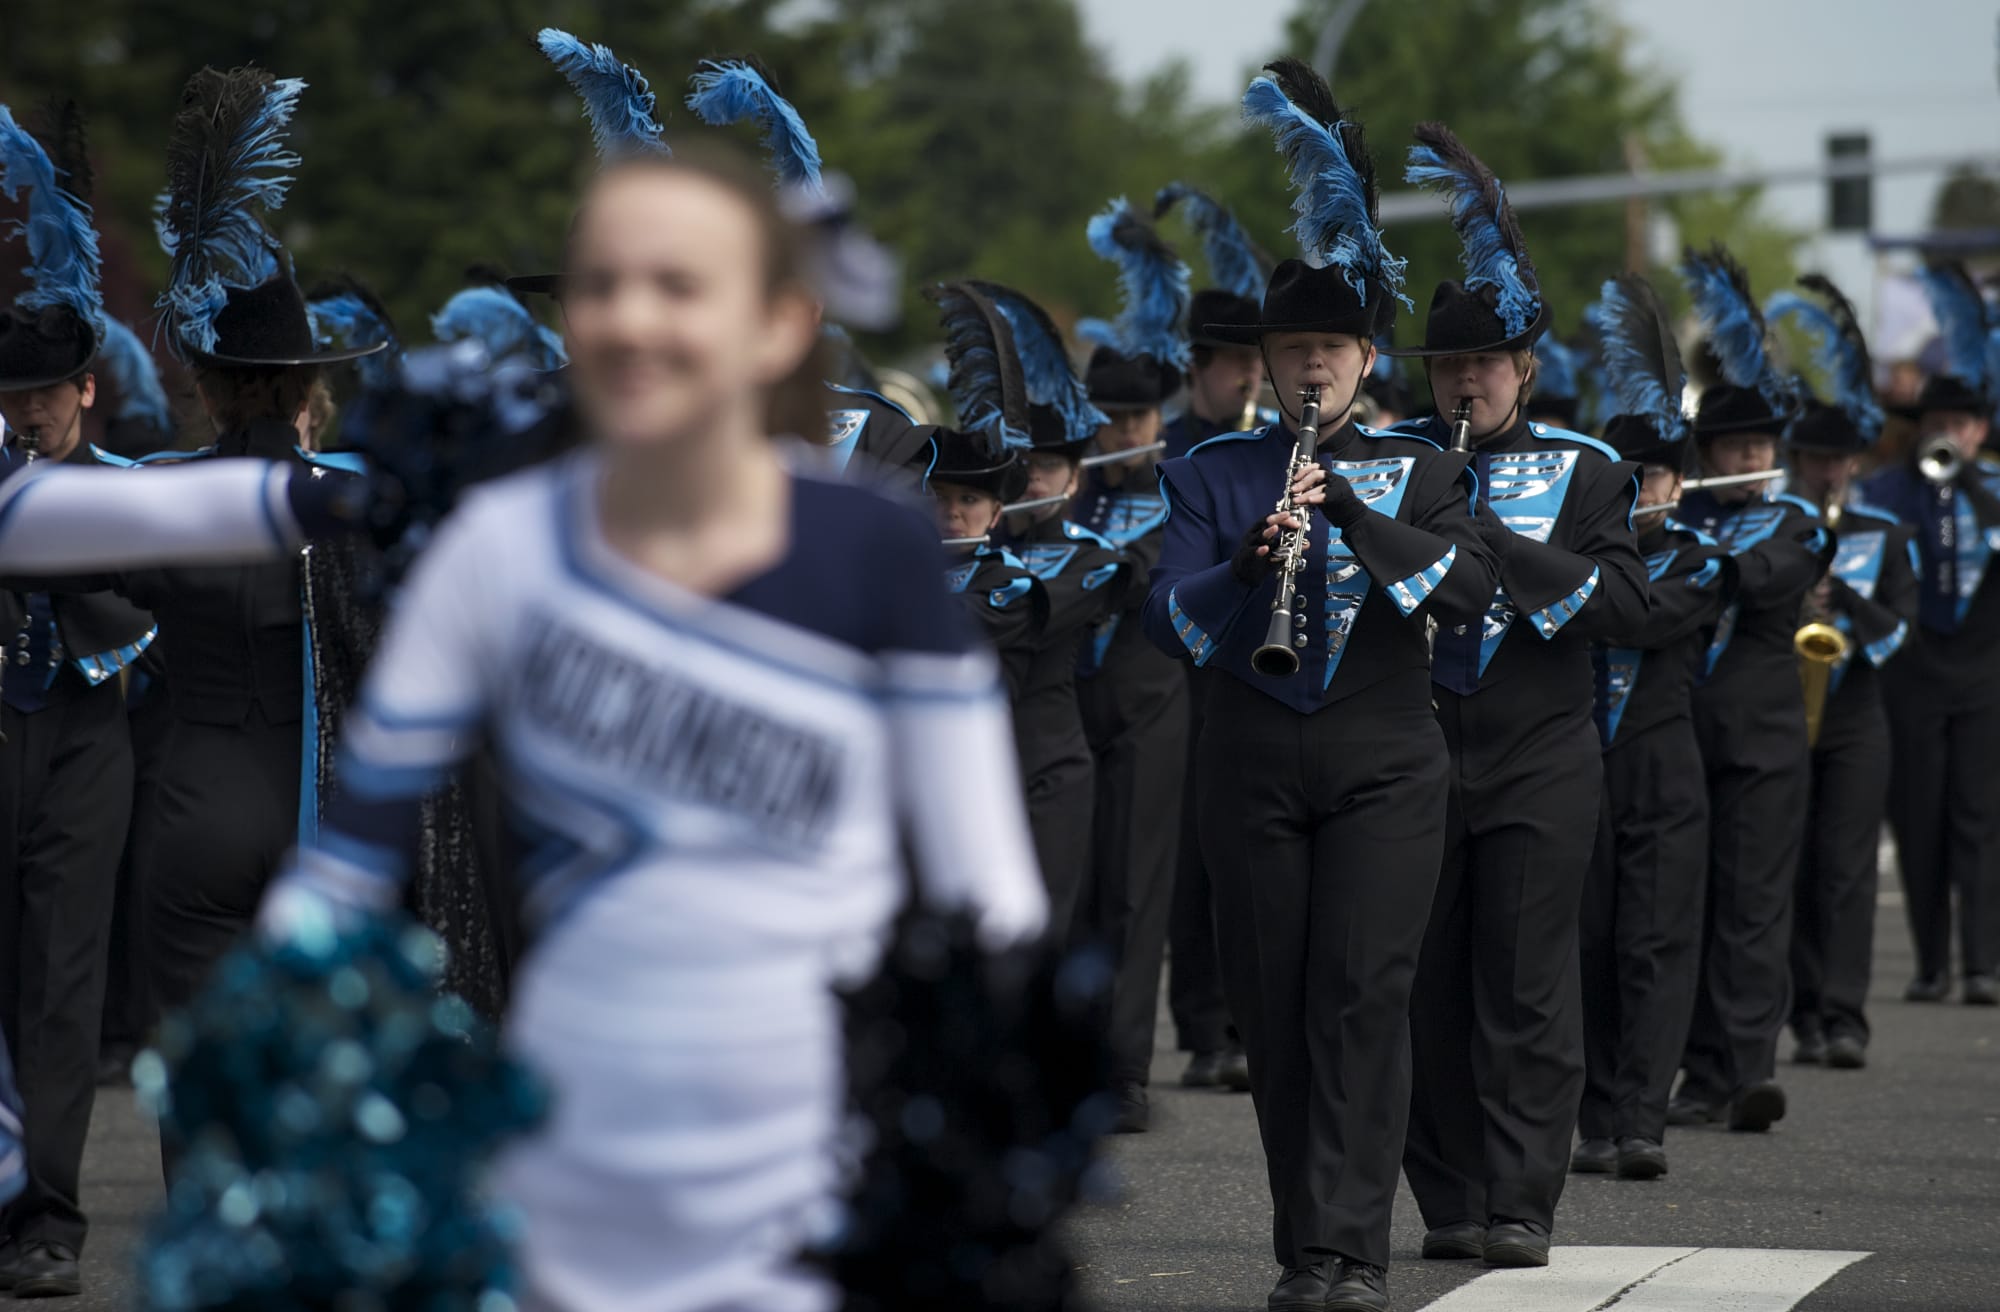 Hockinson High School's was among 26 high school and middle school bands in the parade of bands.